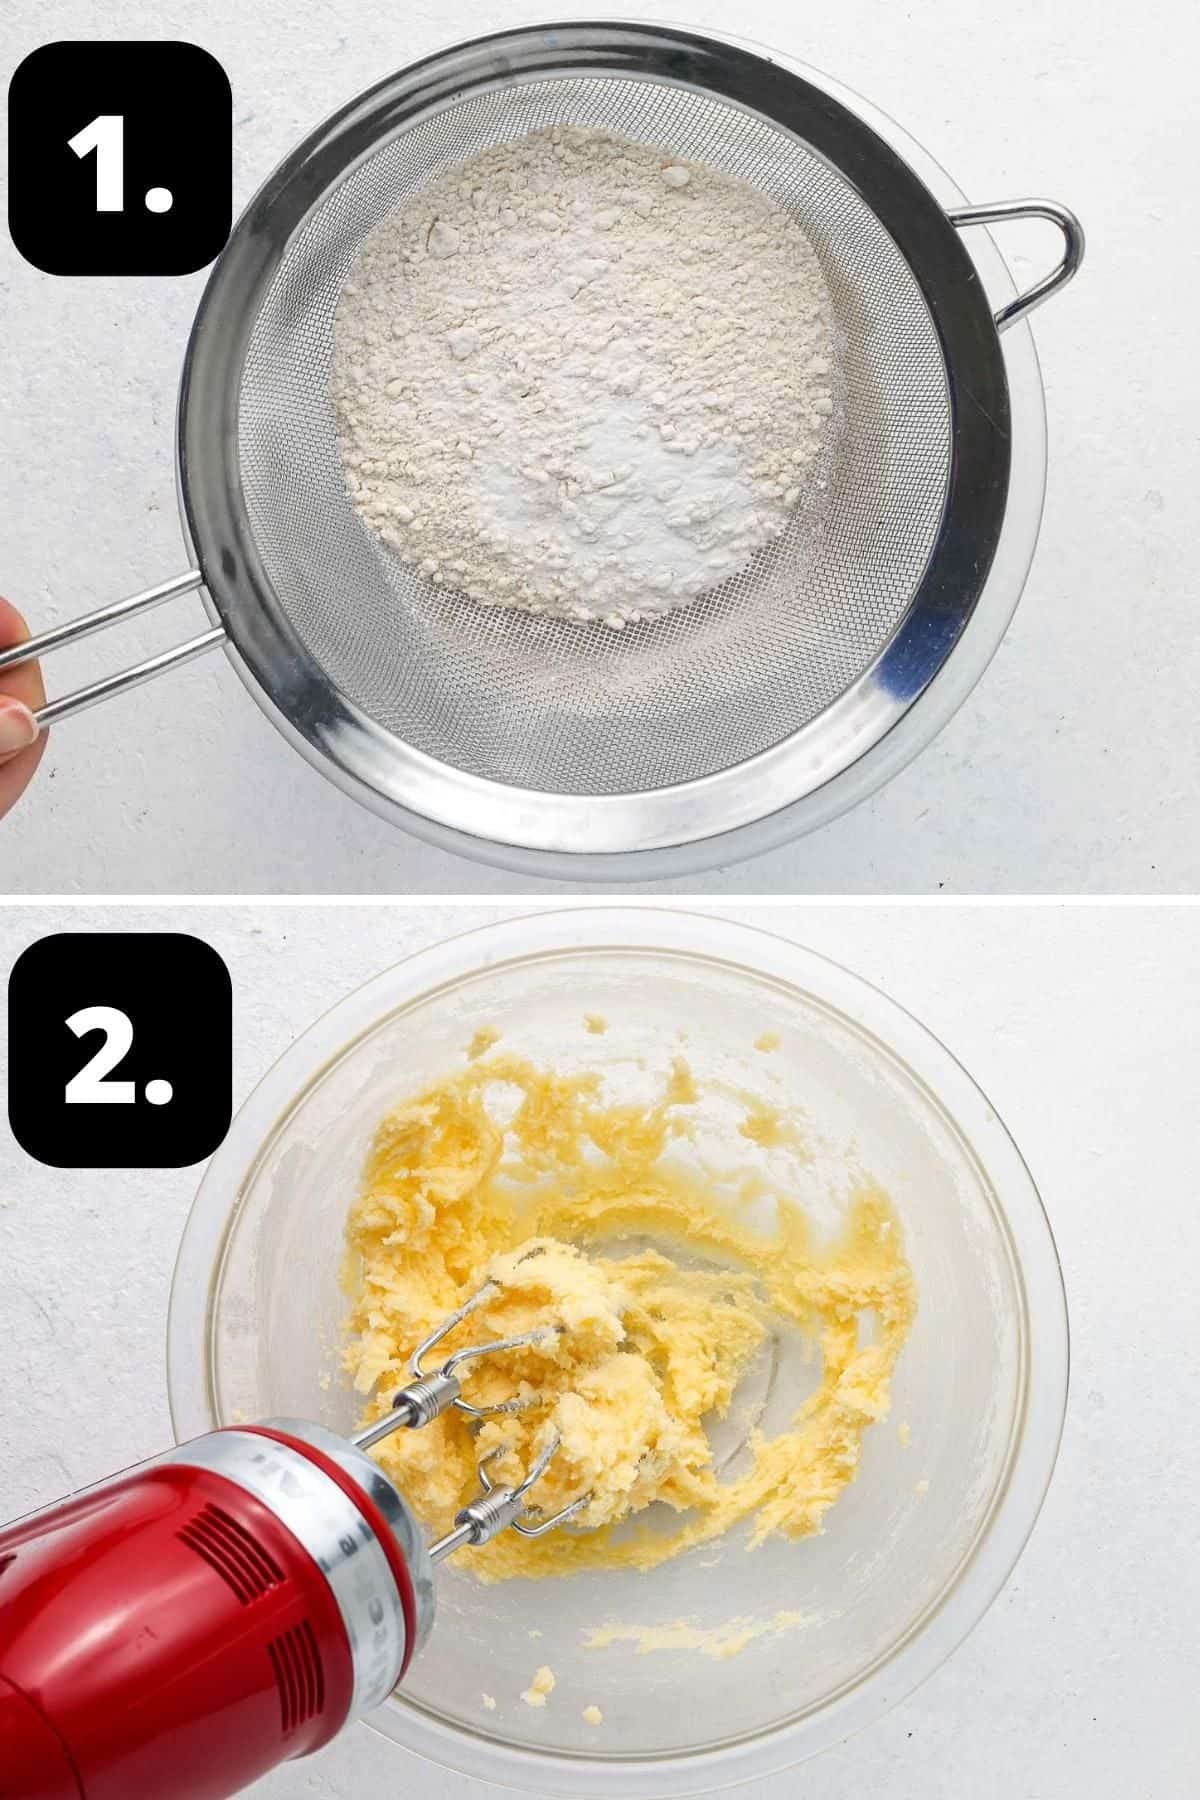 Steps 1-2 of preparing this recipe - sifting dry ingredients into a bowl and creaming the butter and sugar together in a bowl.